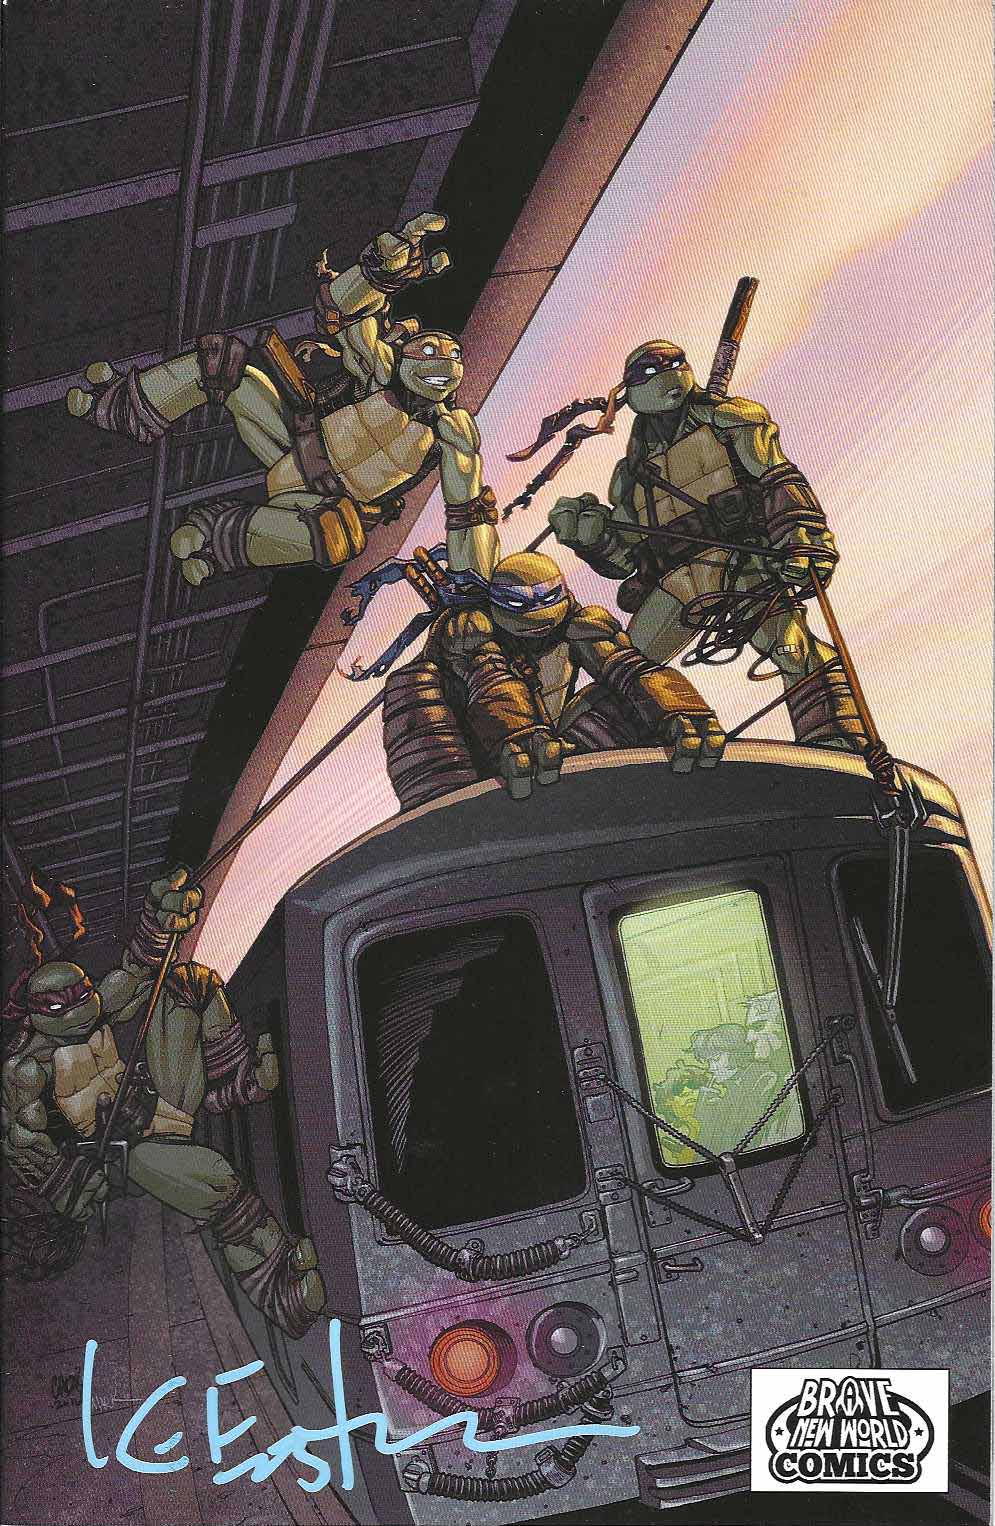 TMNT Issue #70 RE Brave New World Variant – Signed